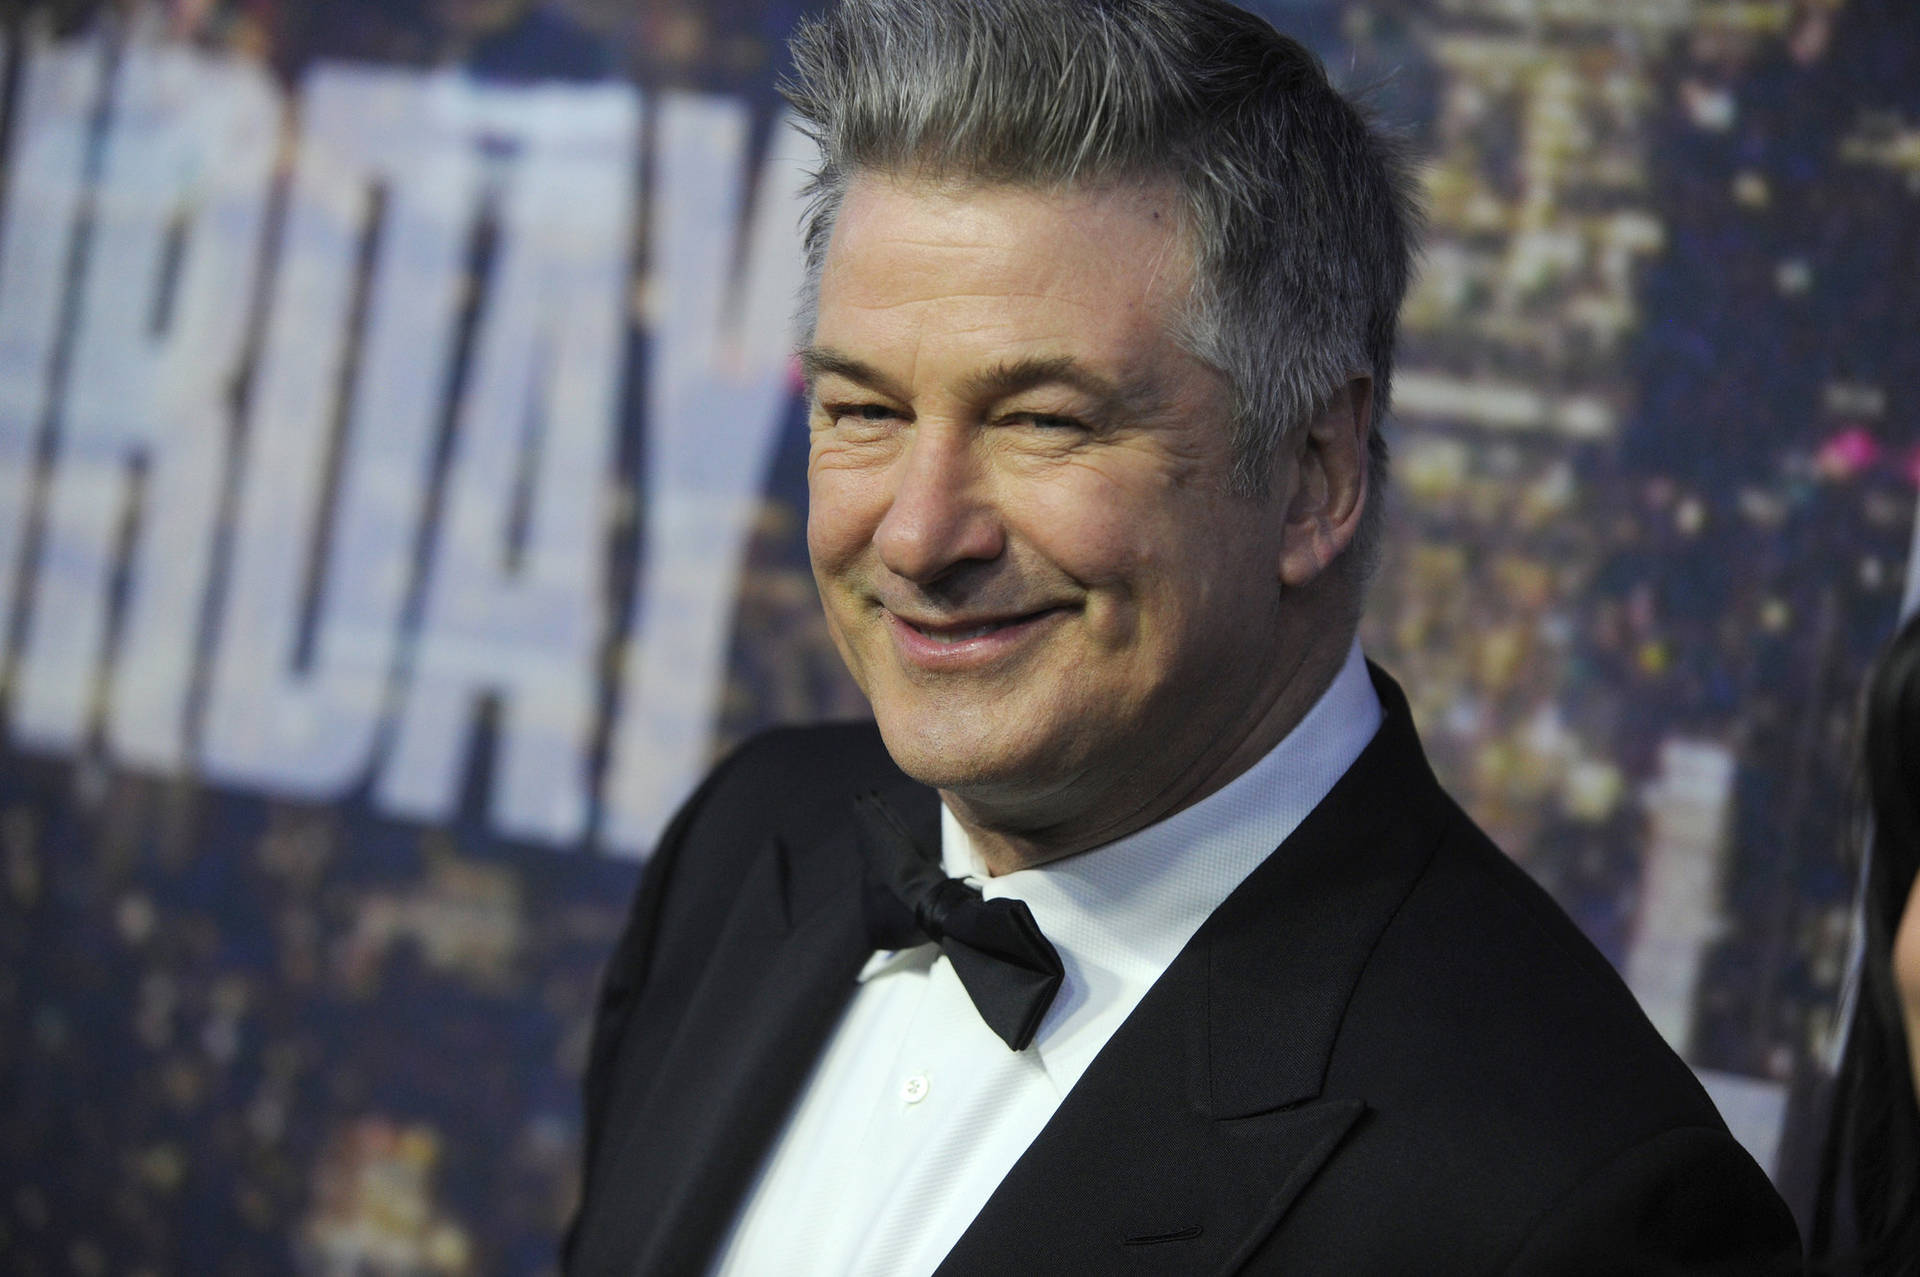 Alec Baldwin Gorgeously Looking Actor Background